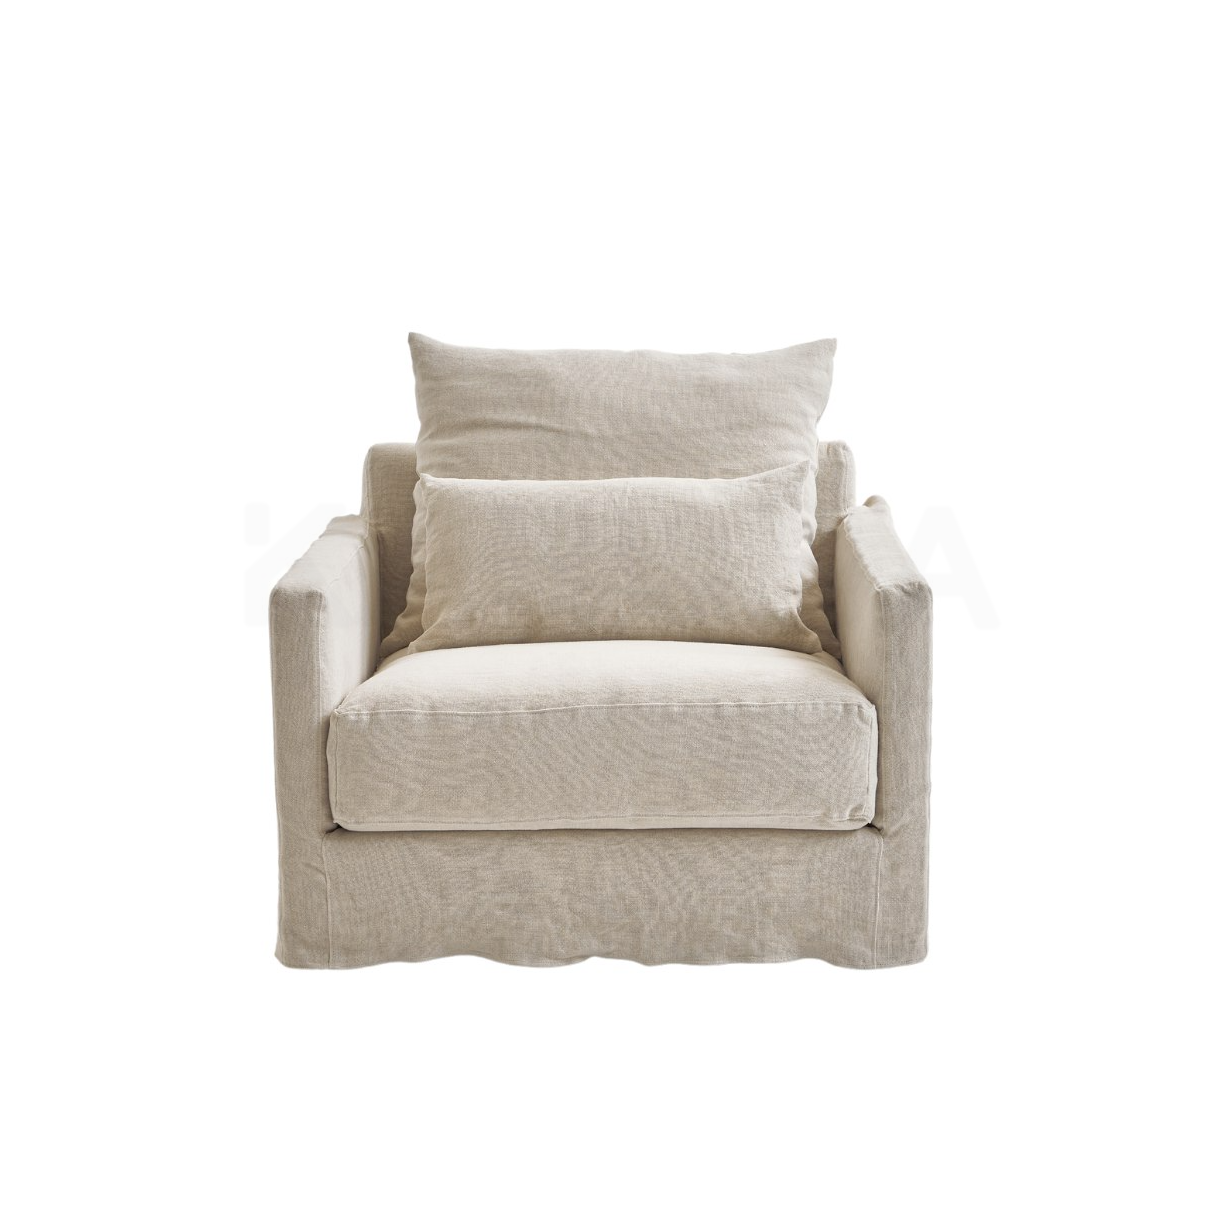 Sloopy - 1 Seater Sofa